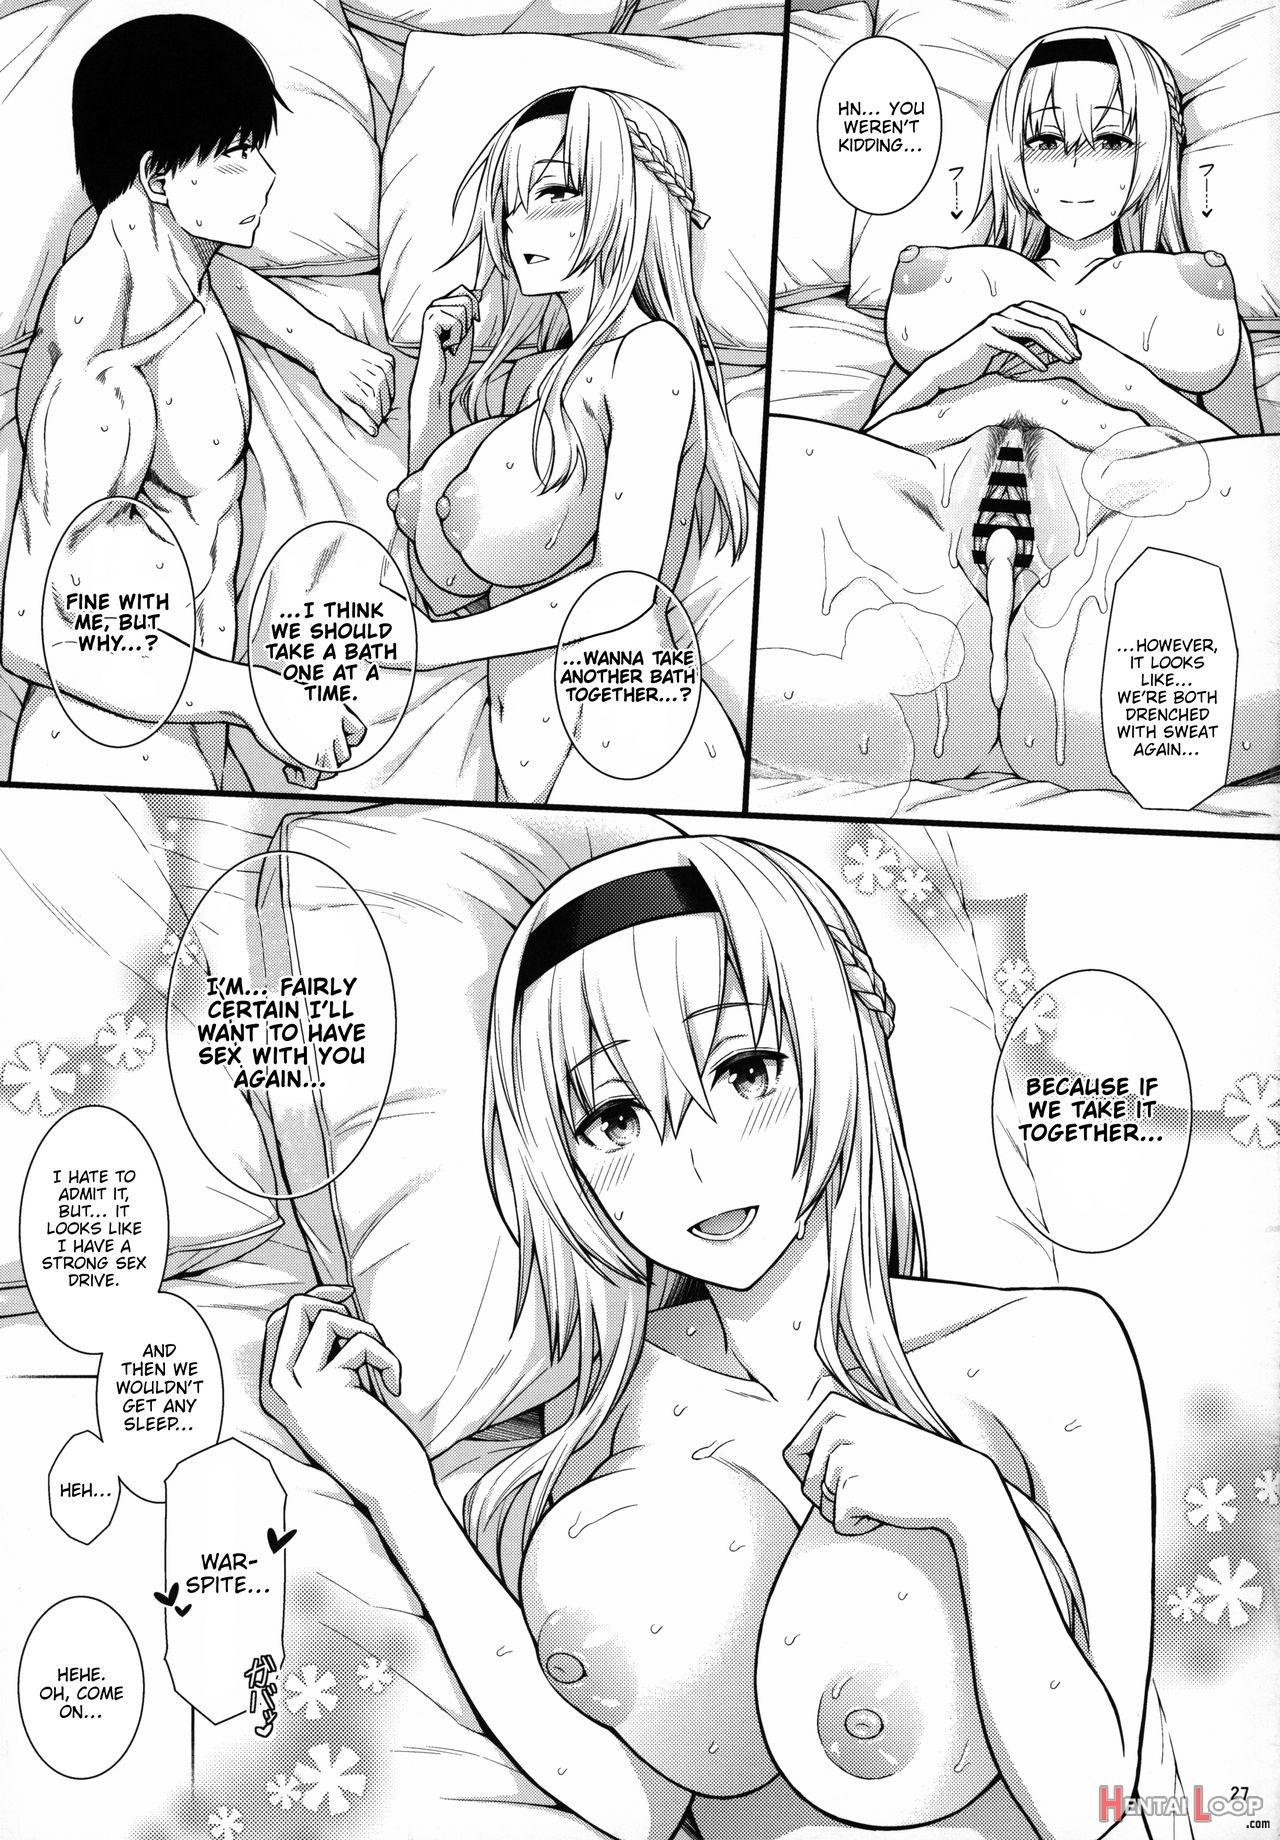 Her Majesty Warspite Has A Strong Sex Drive. page 28